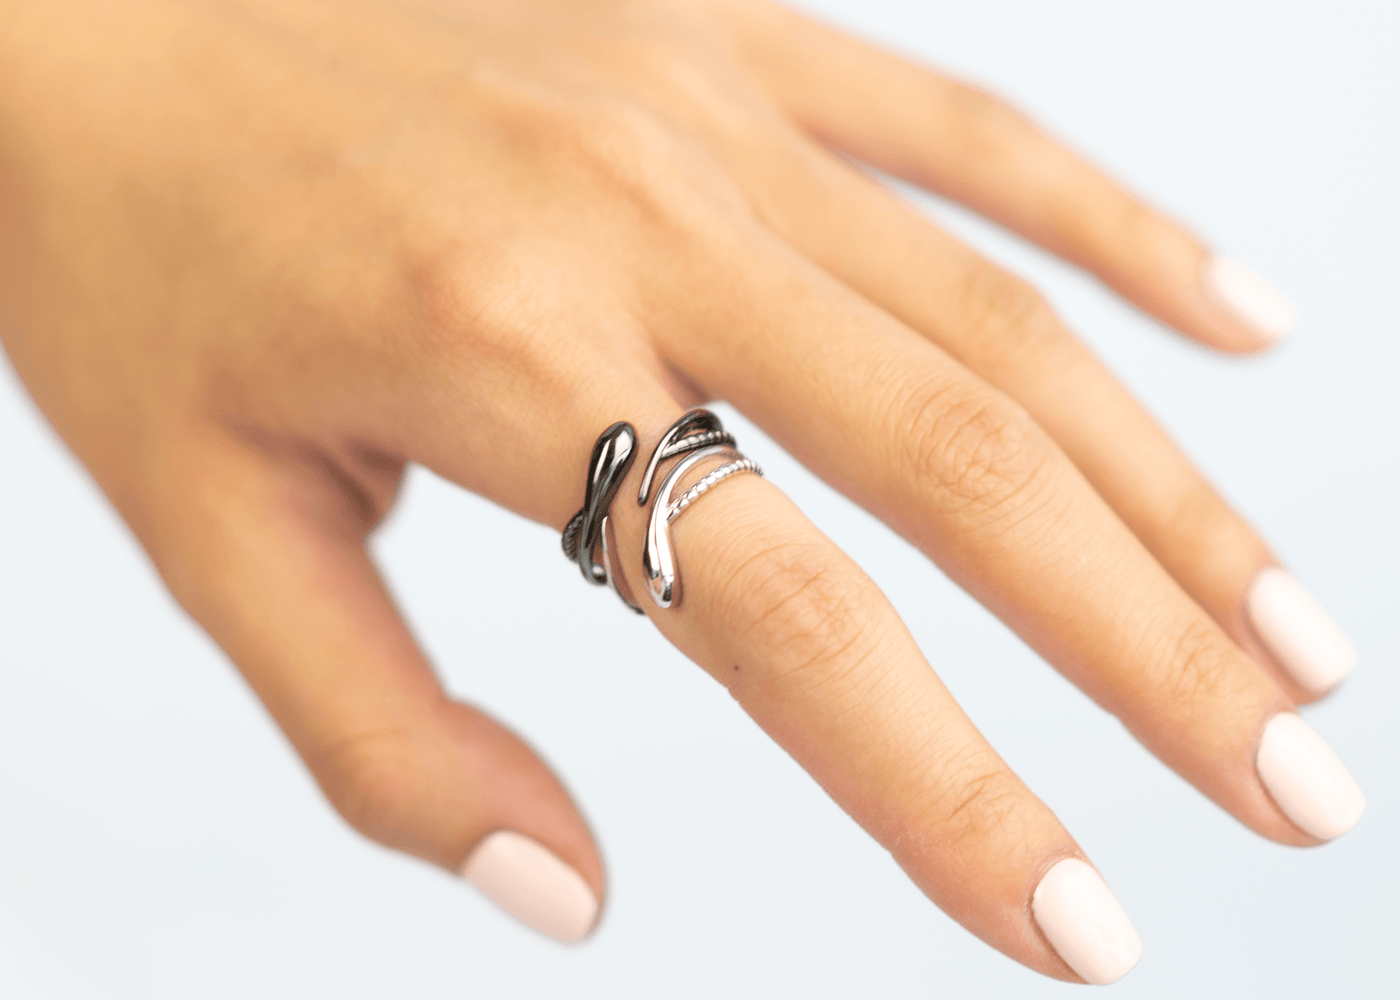 Snaked Wrap Ring